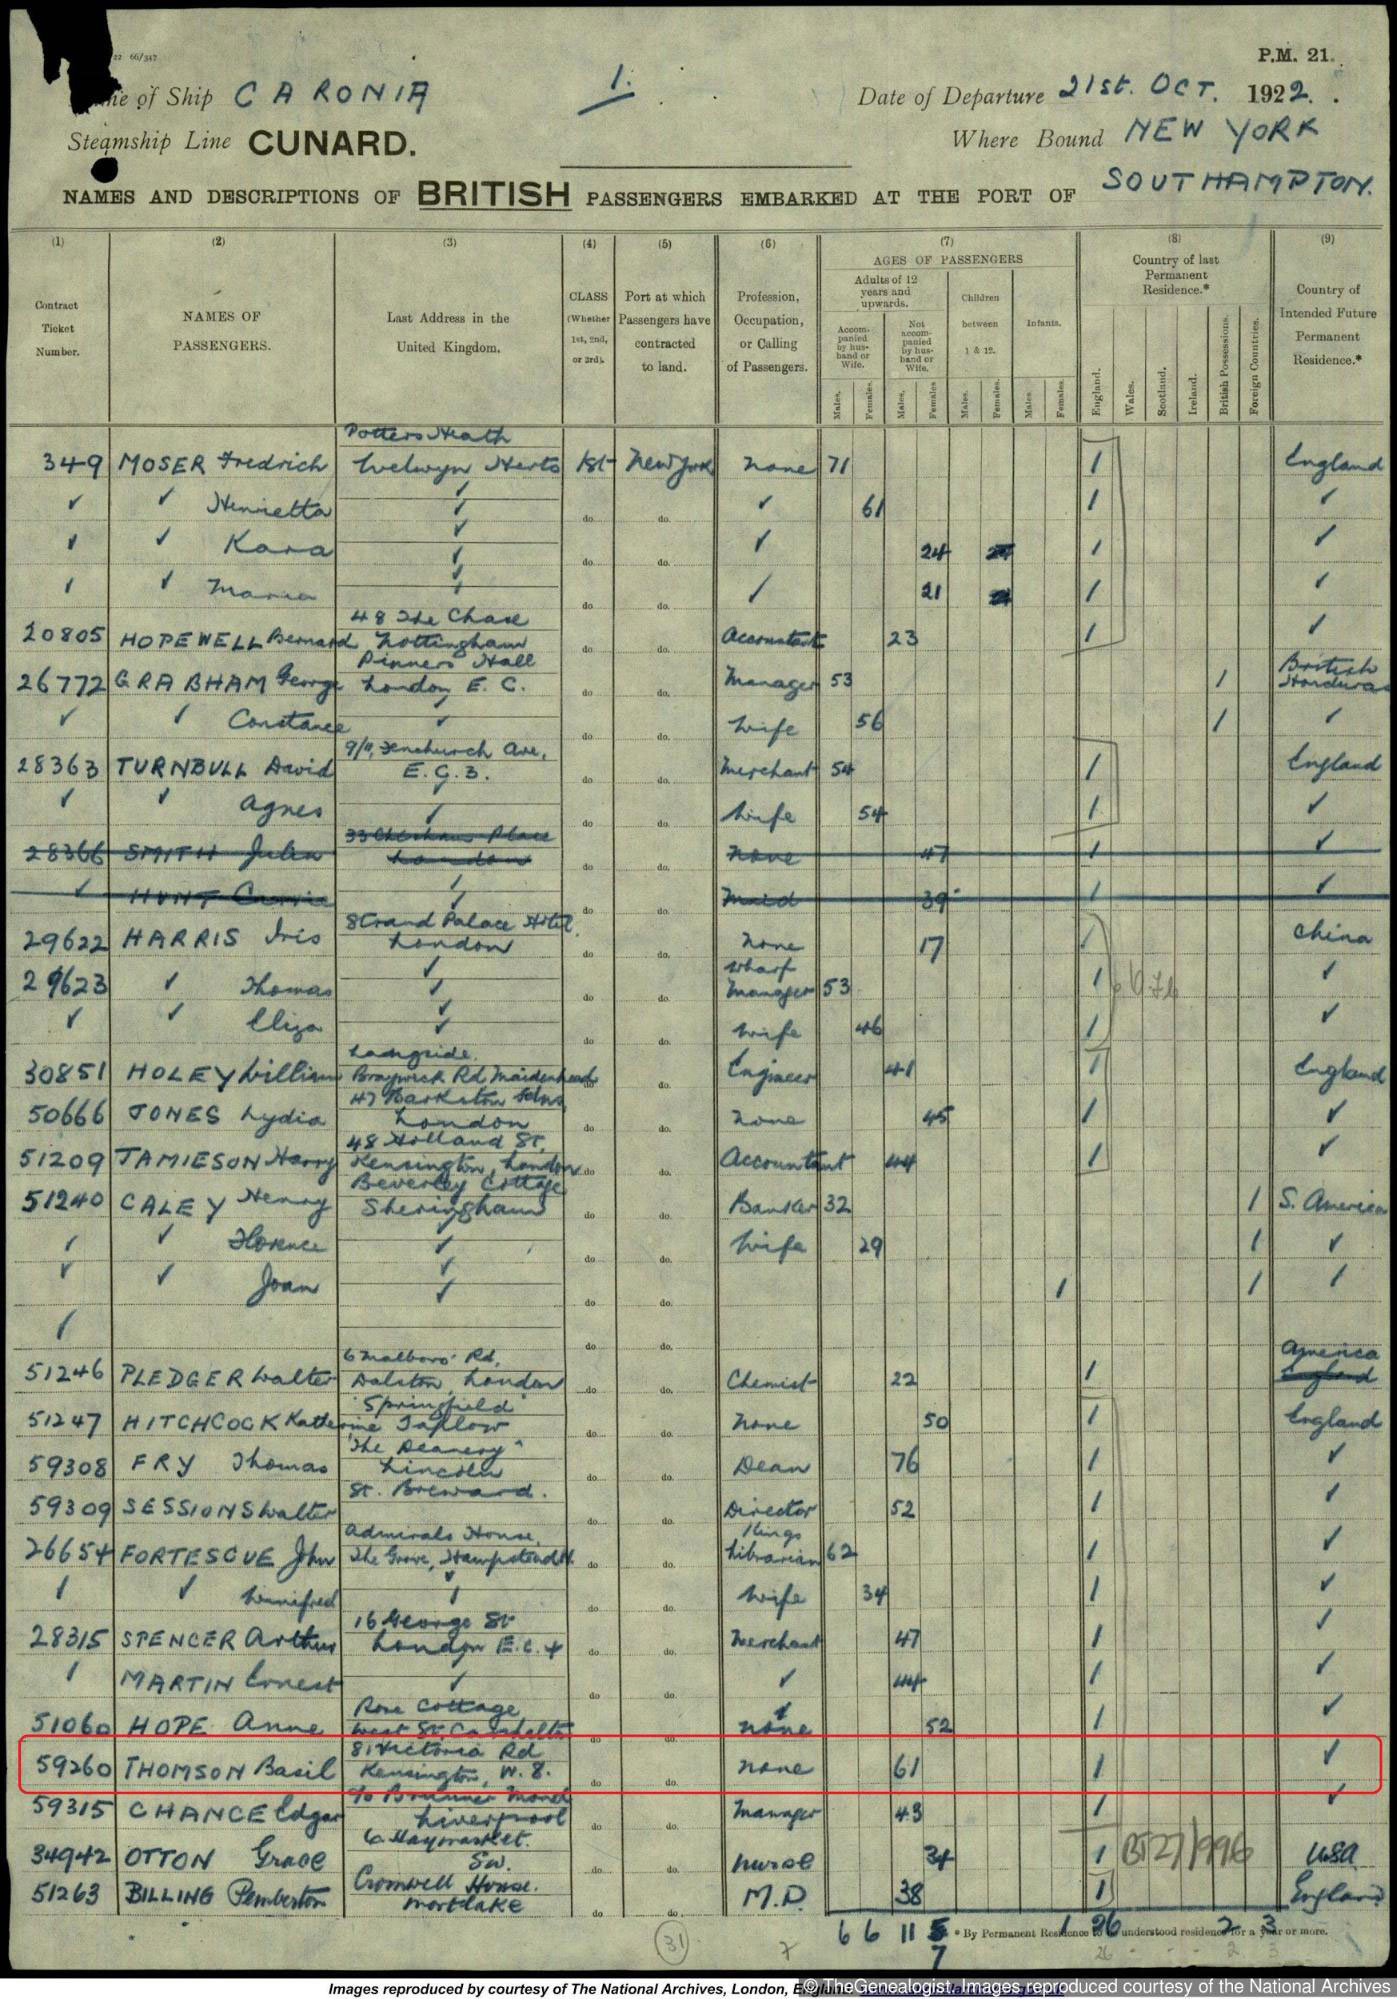 Basil in a New York outbound passenger list